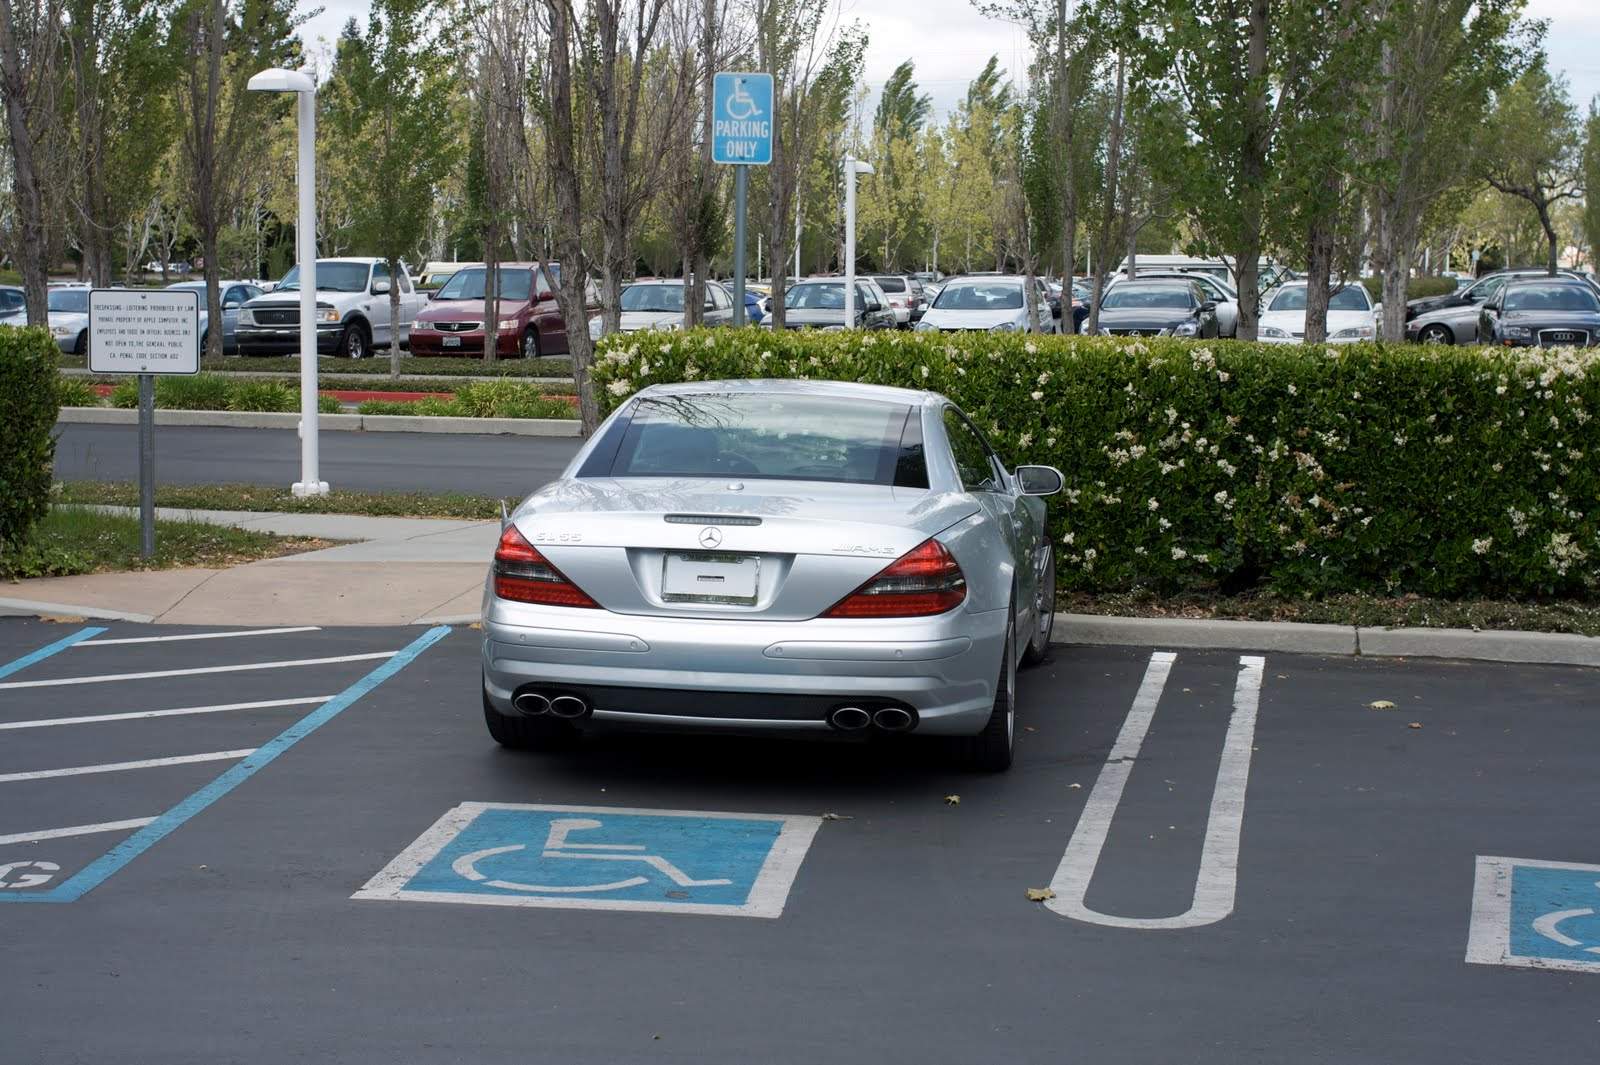 Jobs would regularly park his Mercedes in a handicap spot on Apple's campus